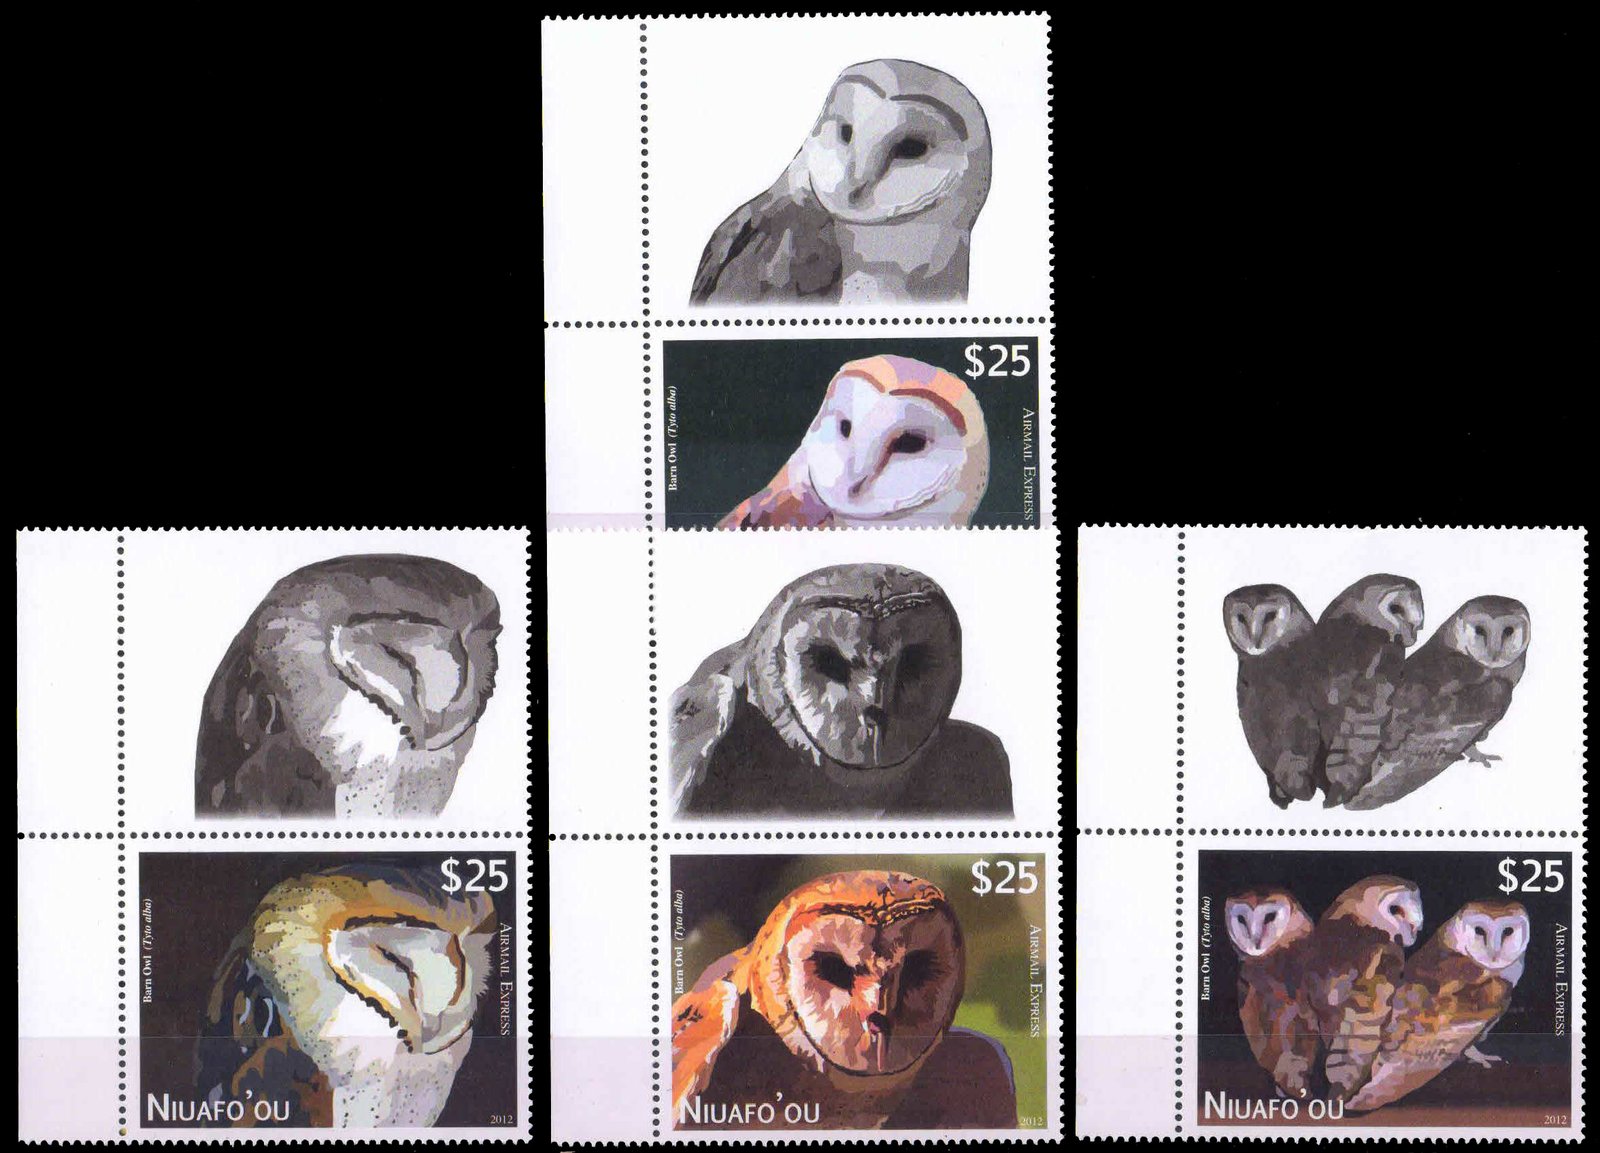 NIUAFO'OU 2012-Airmail Express Stamps-Barn Owl, Set of 4 with Tab as per Scan, S.G. E1-E4, Cat � 88-